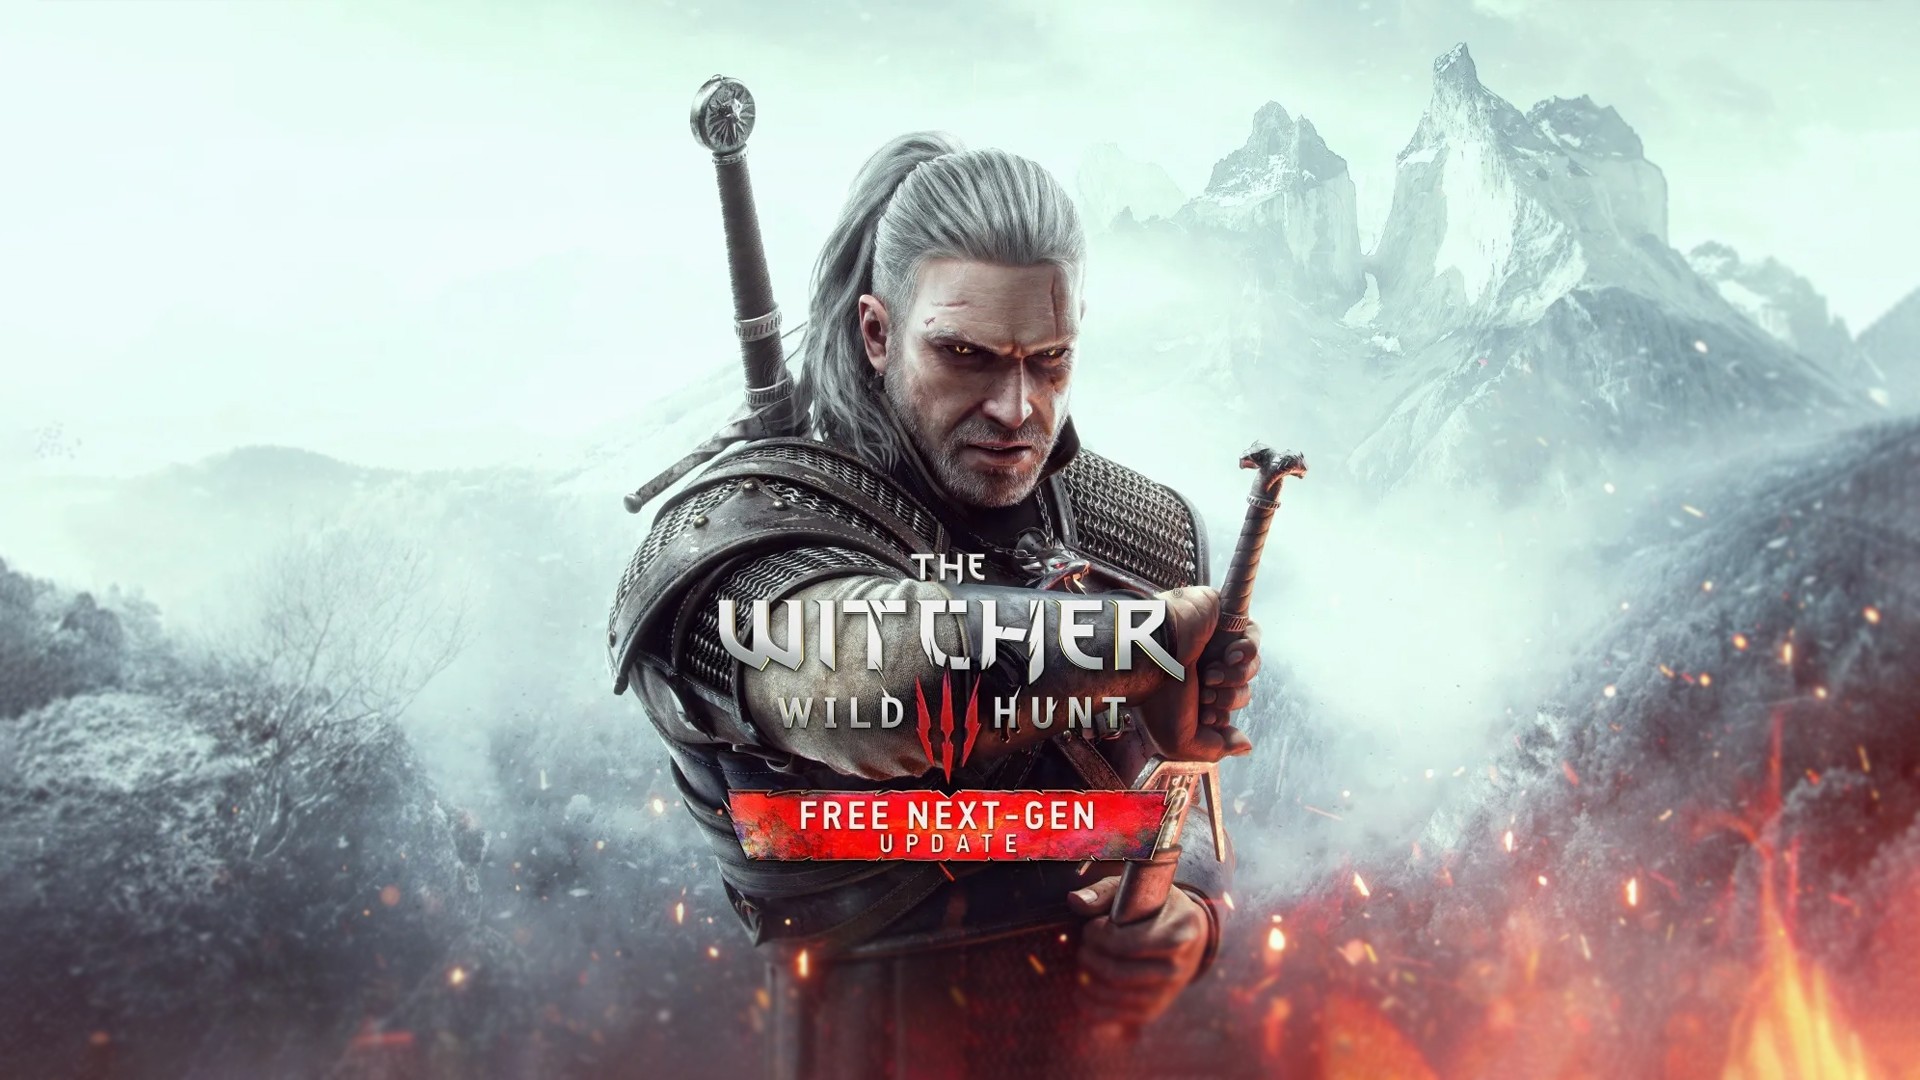 The Witcher 3: video compares graphics and features of the 